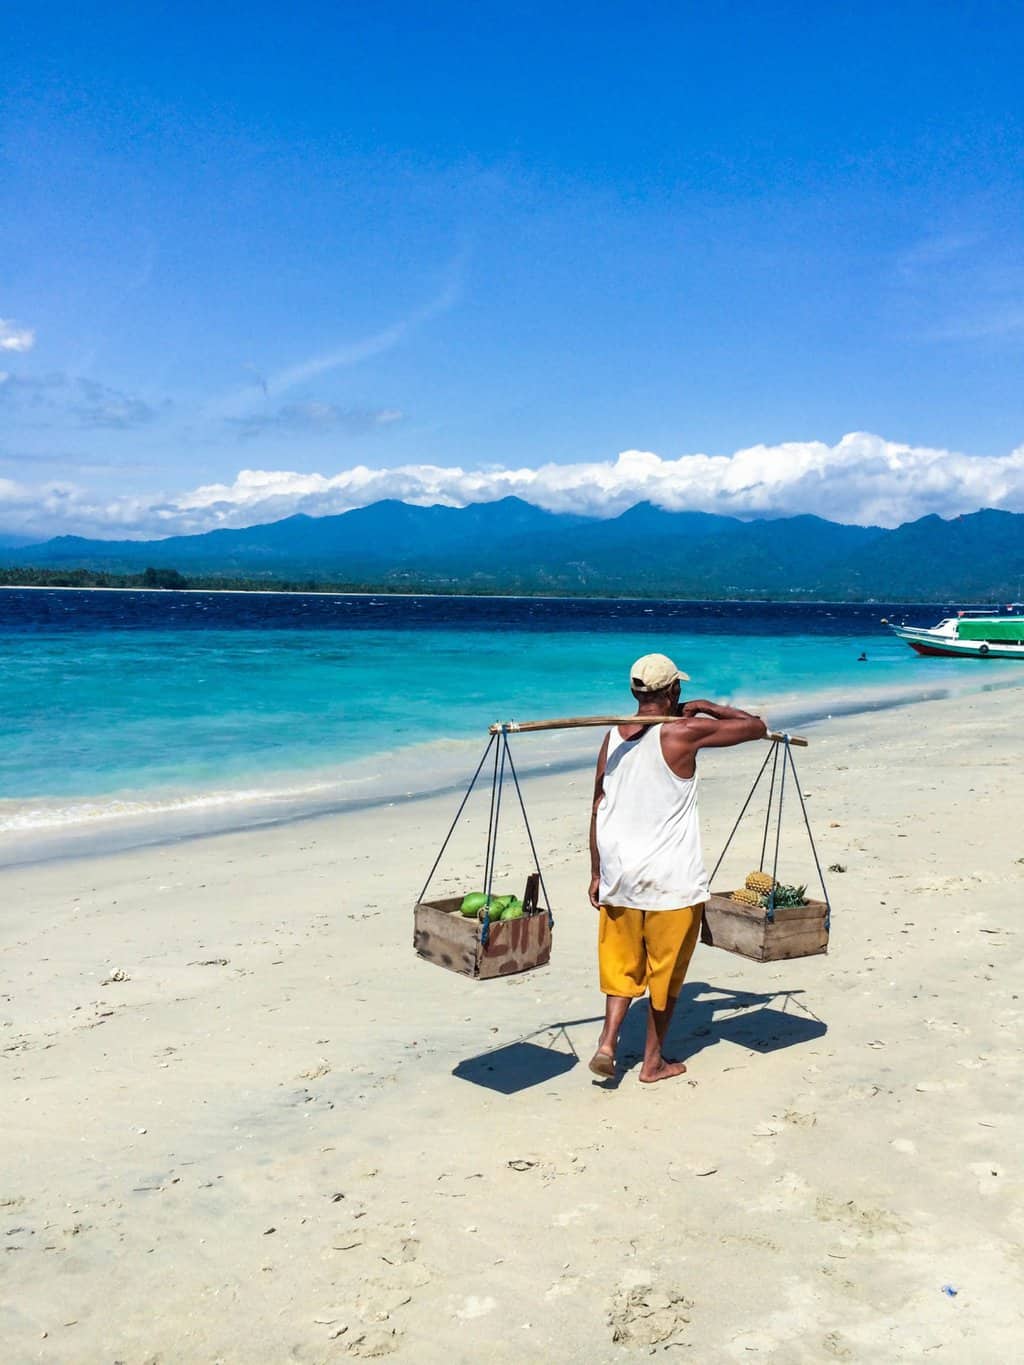 Locals in the Gili Islands